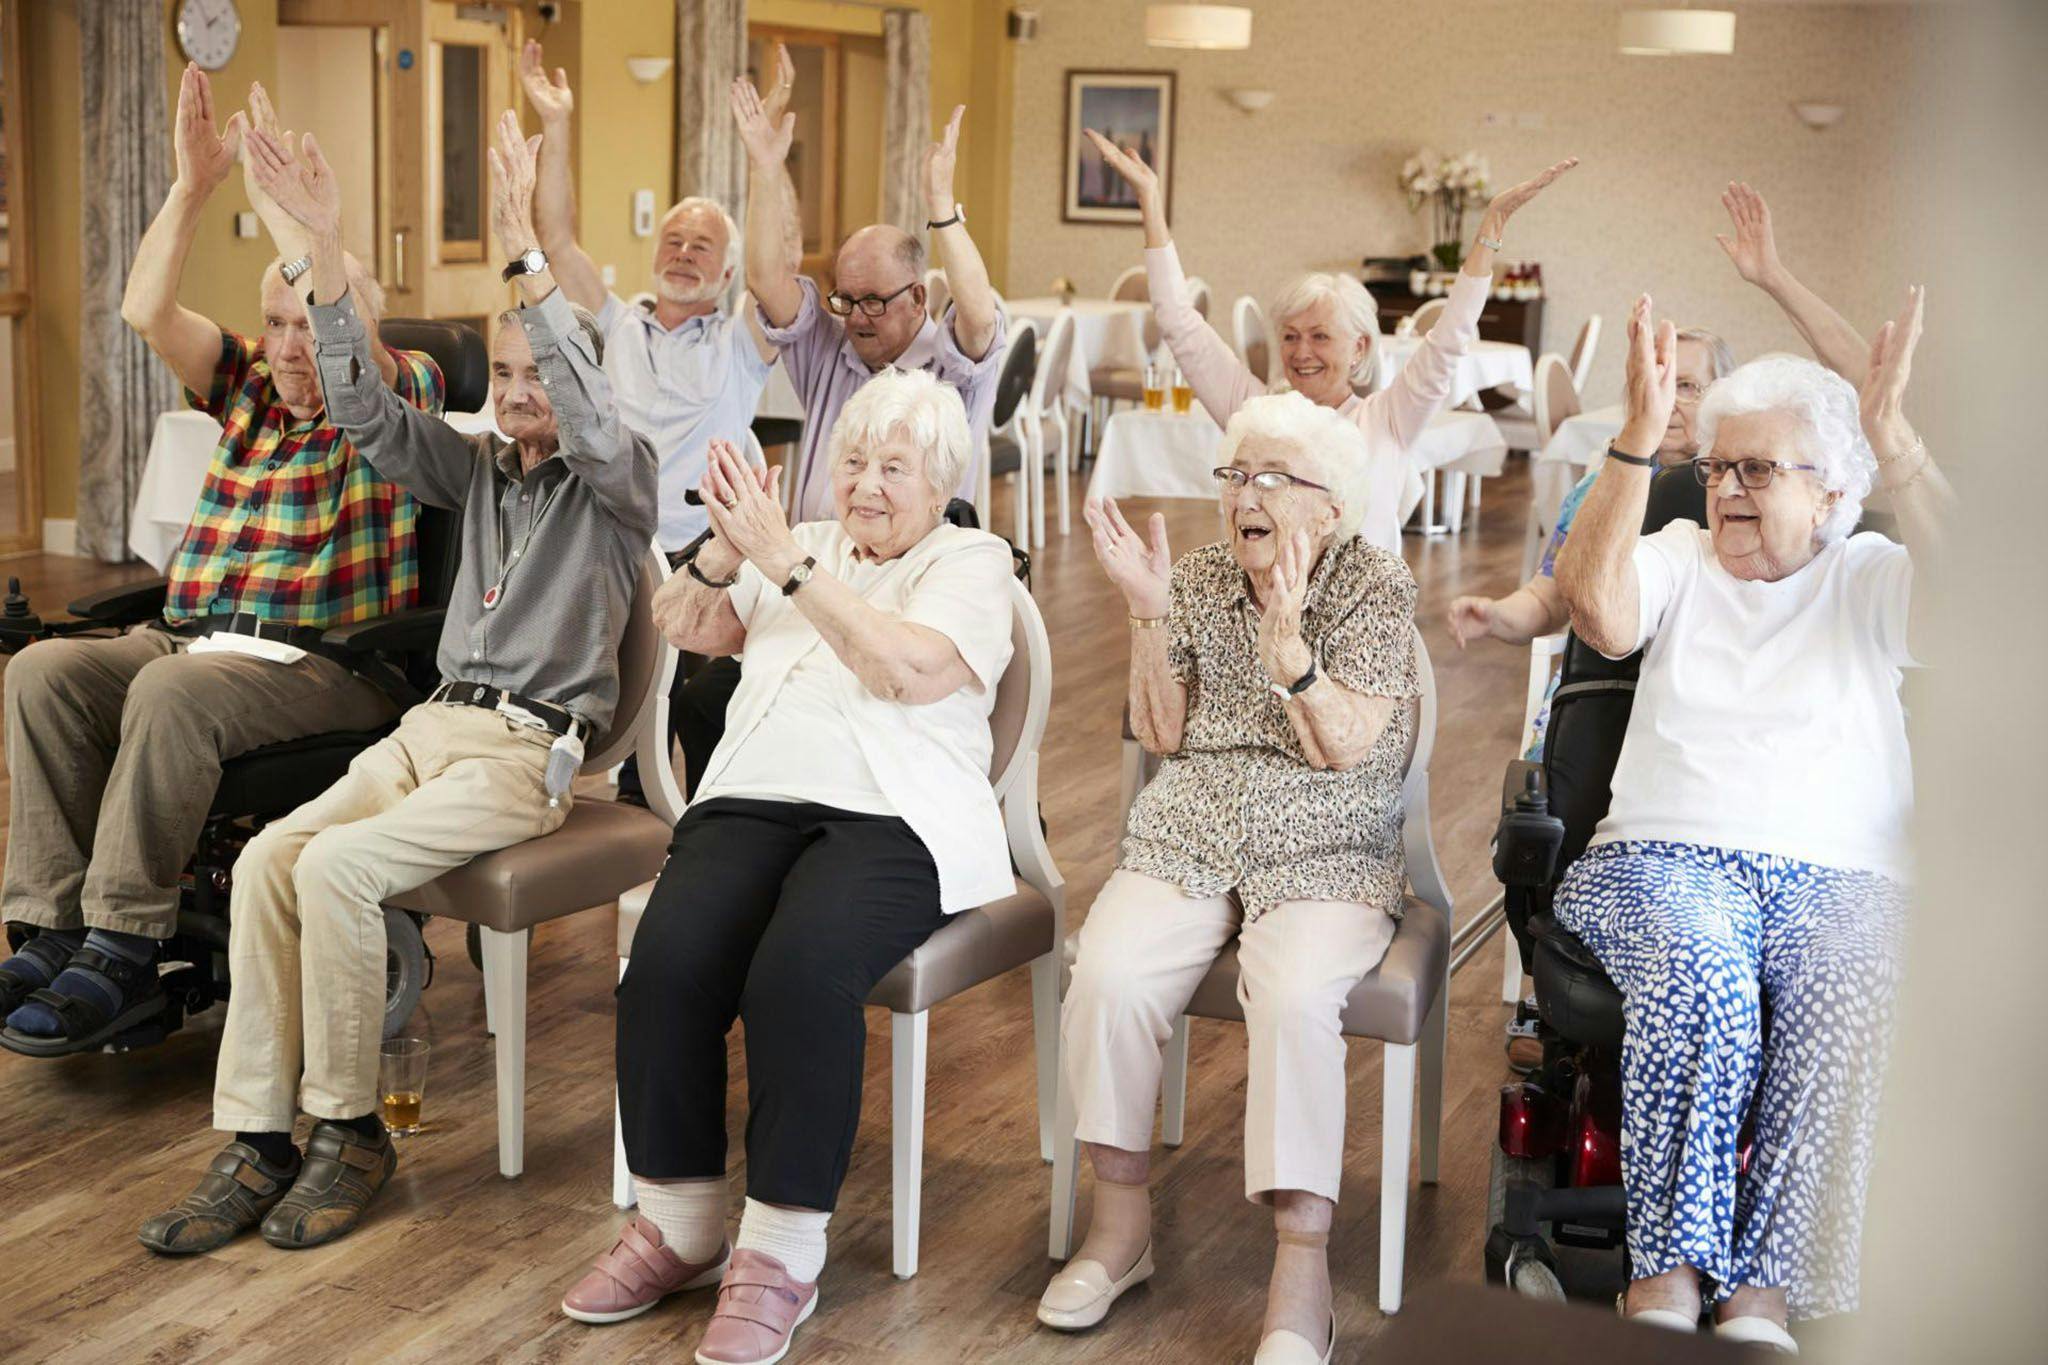 Residents of Meadowside care home in North Finchley, London